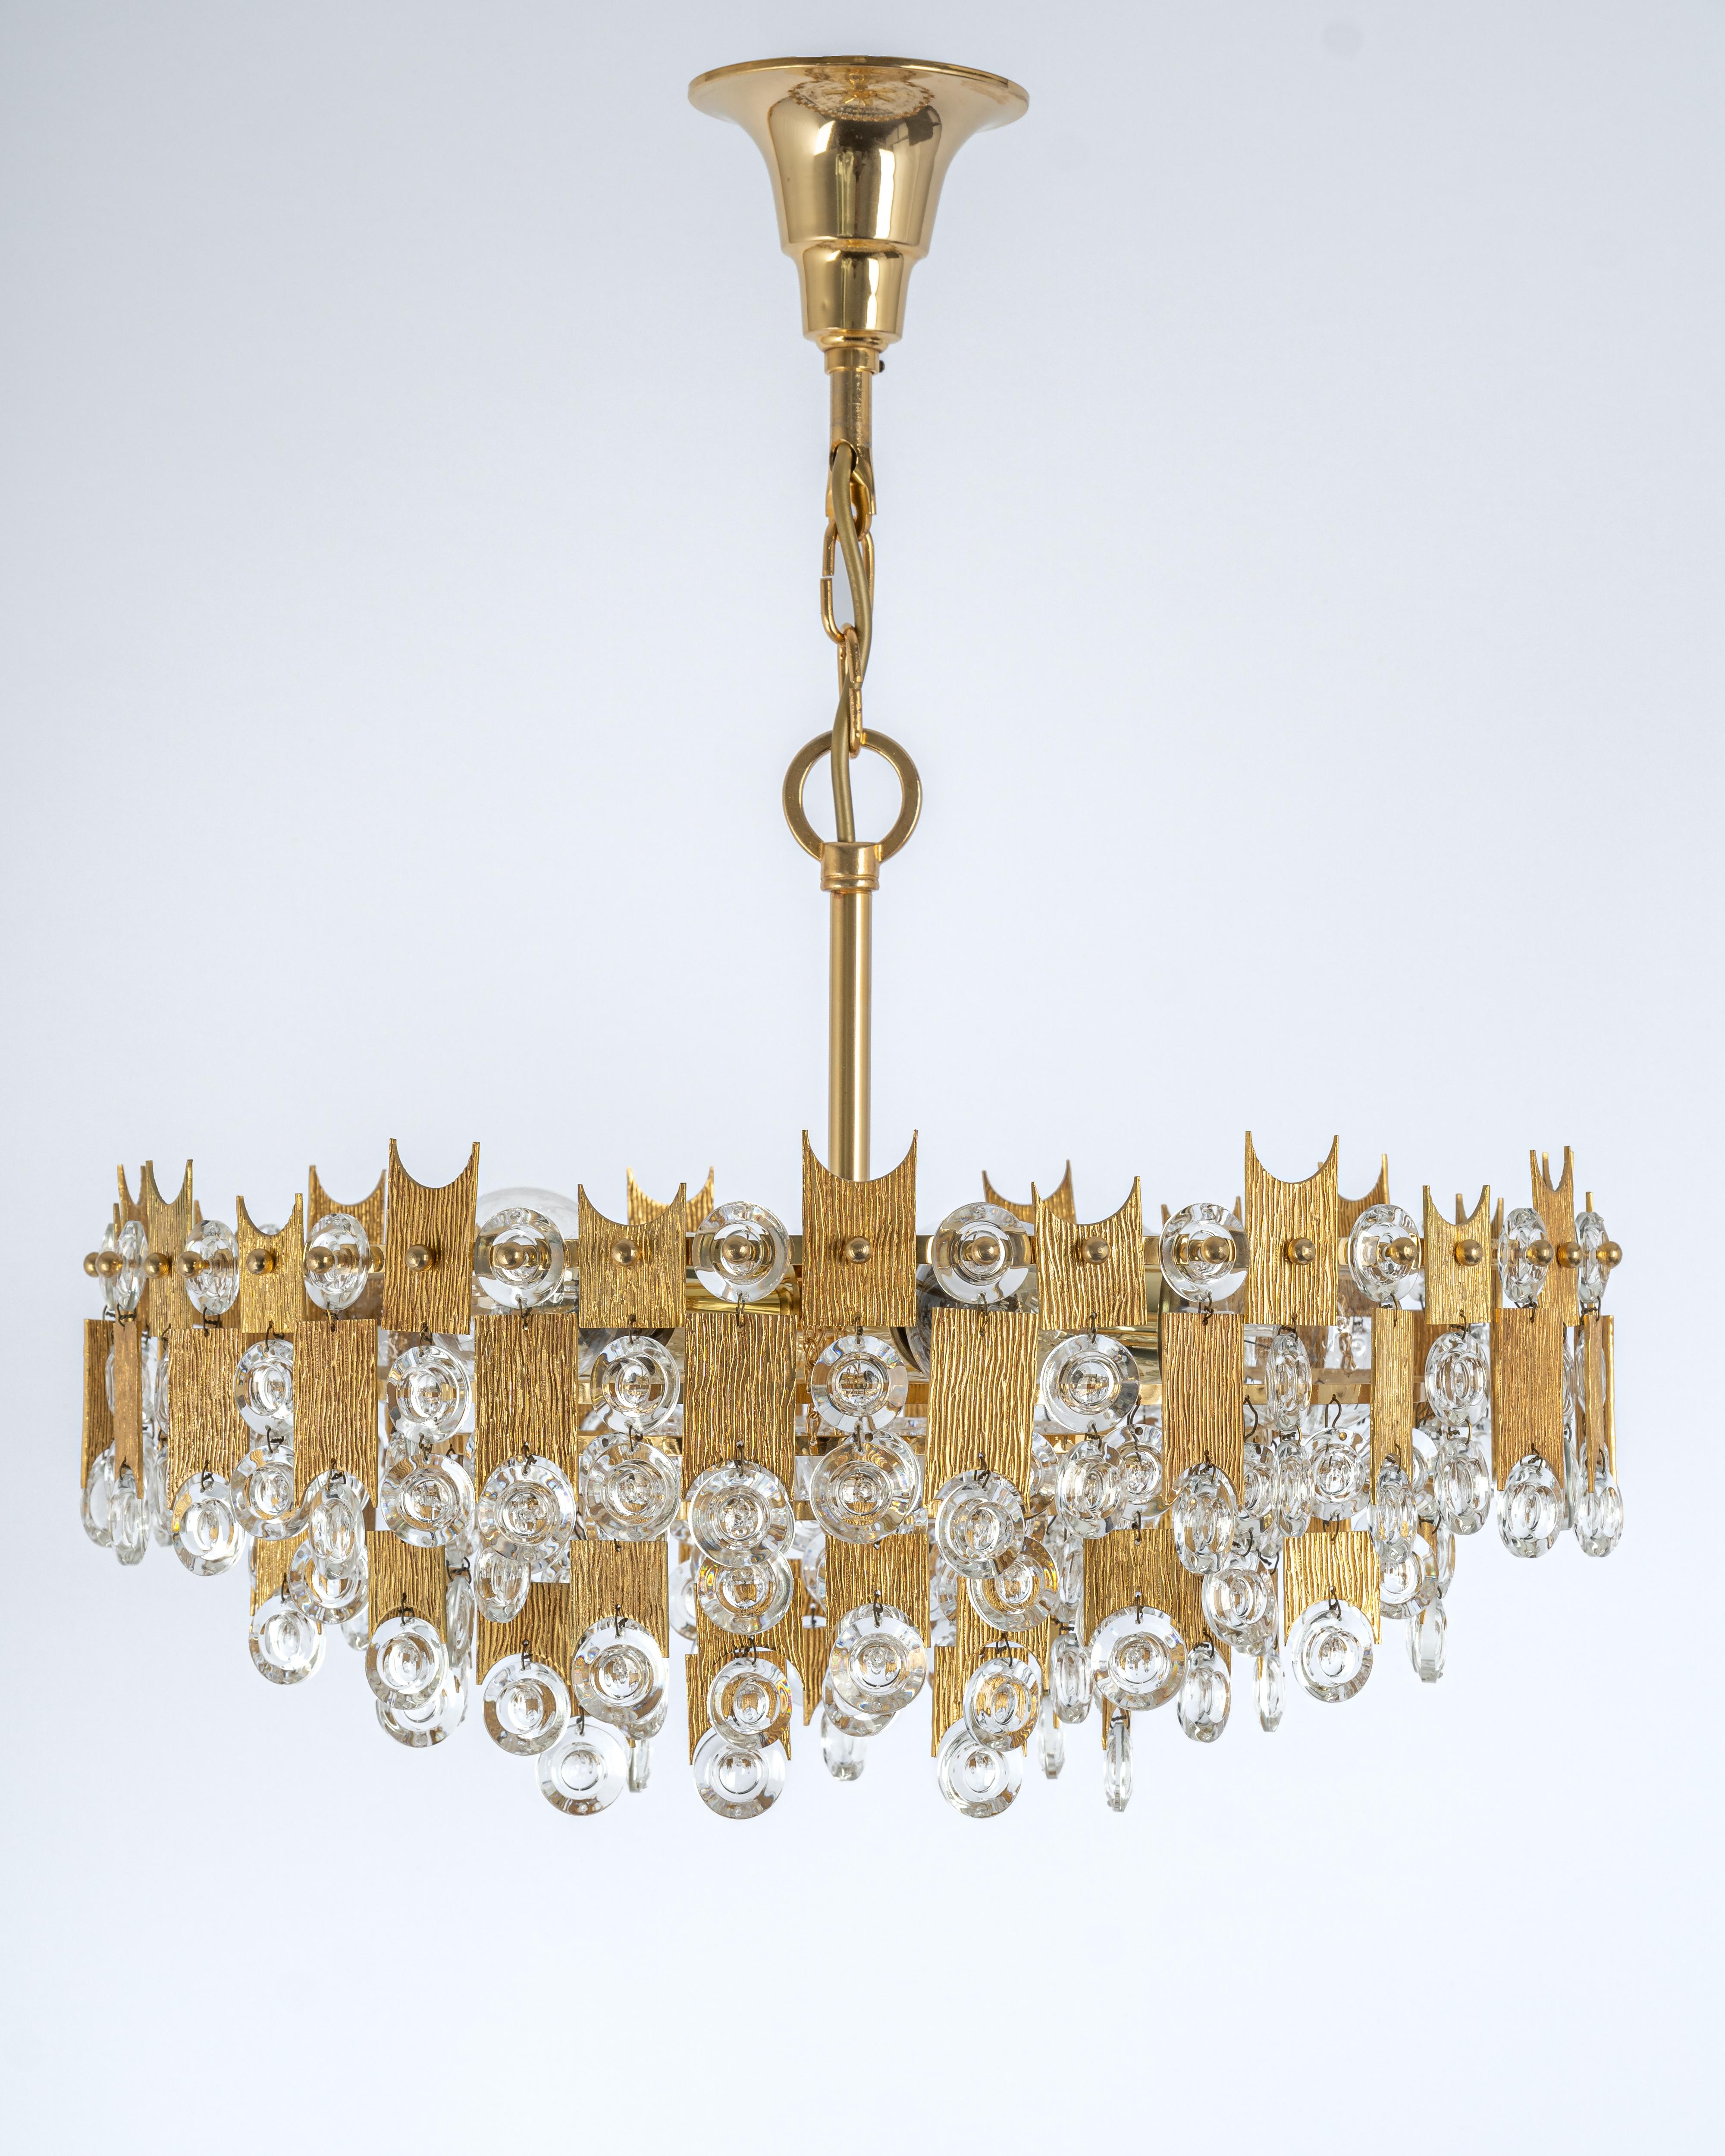 A stunning chandelier by Palwa (Palme and Walter), Germany, manufactured in the 1960s. It’s composed of jewel-like glass pieces and brass plates with a nice relief.

Sockets: It needs six x E27 standard bulbs to illuminate.
Light bulbs are not